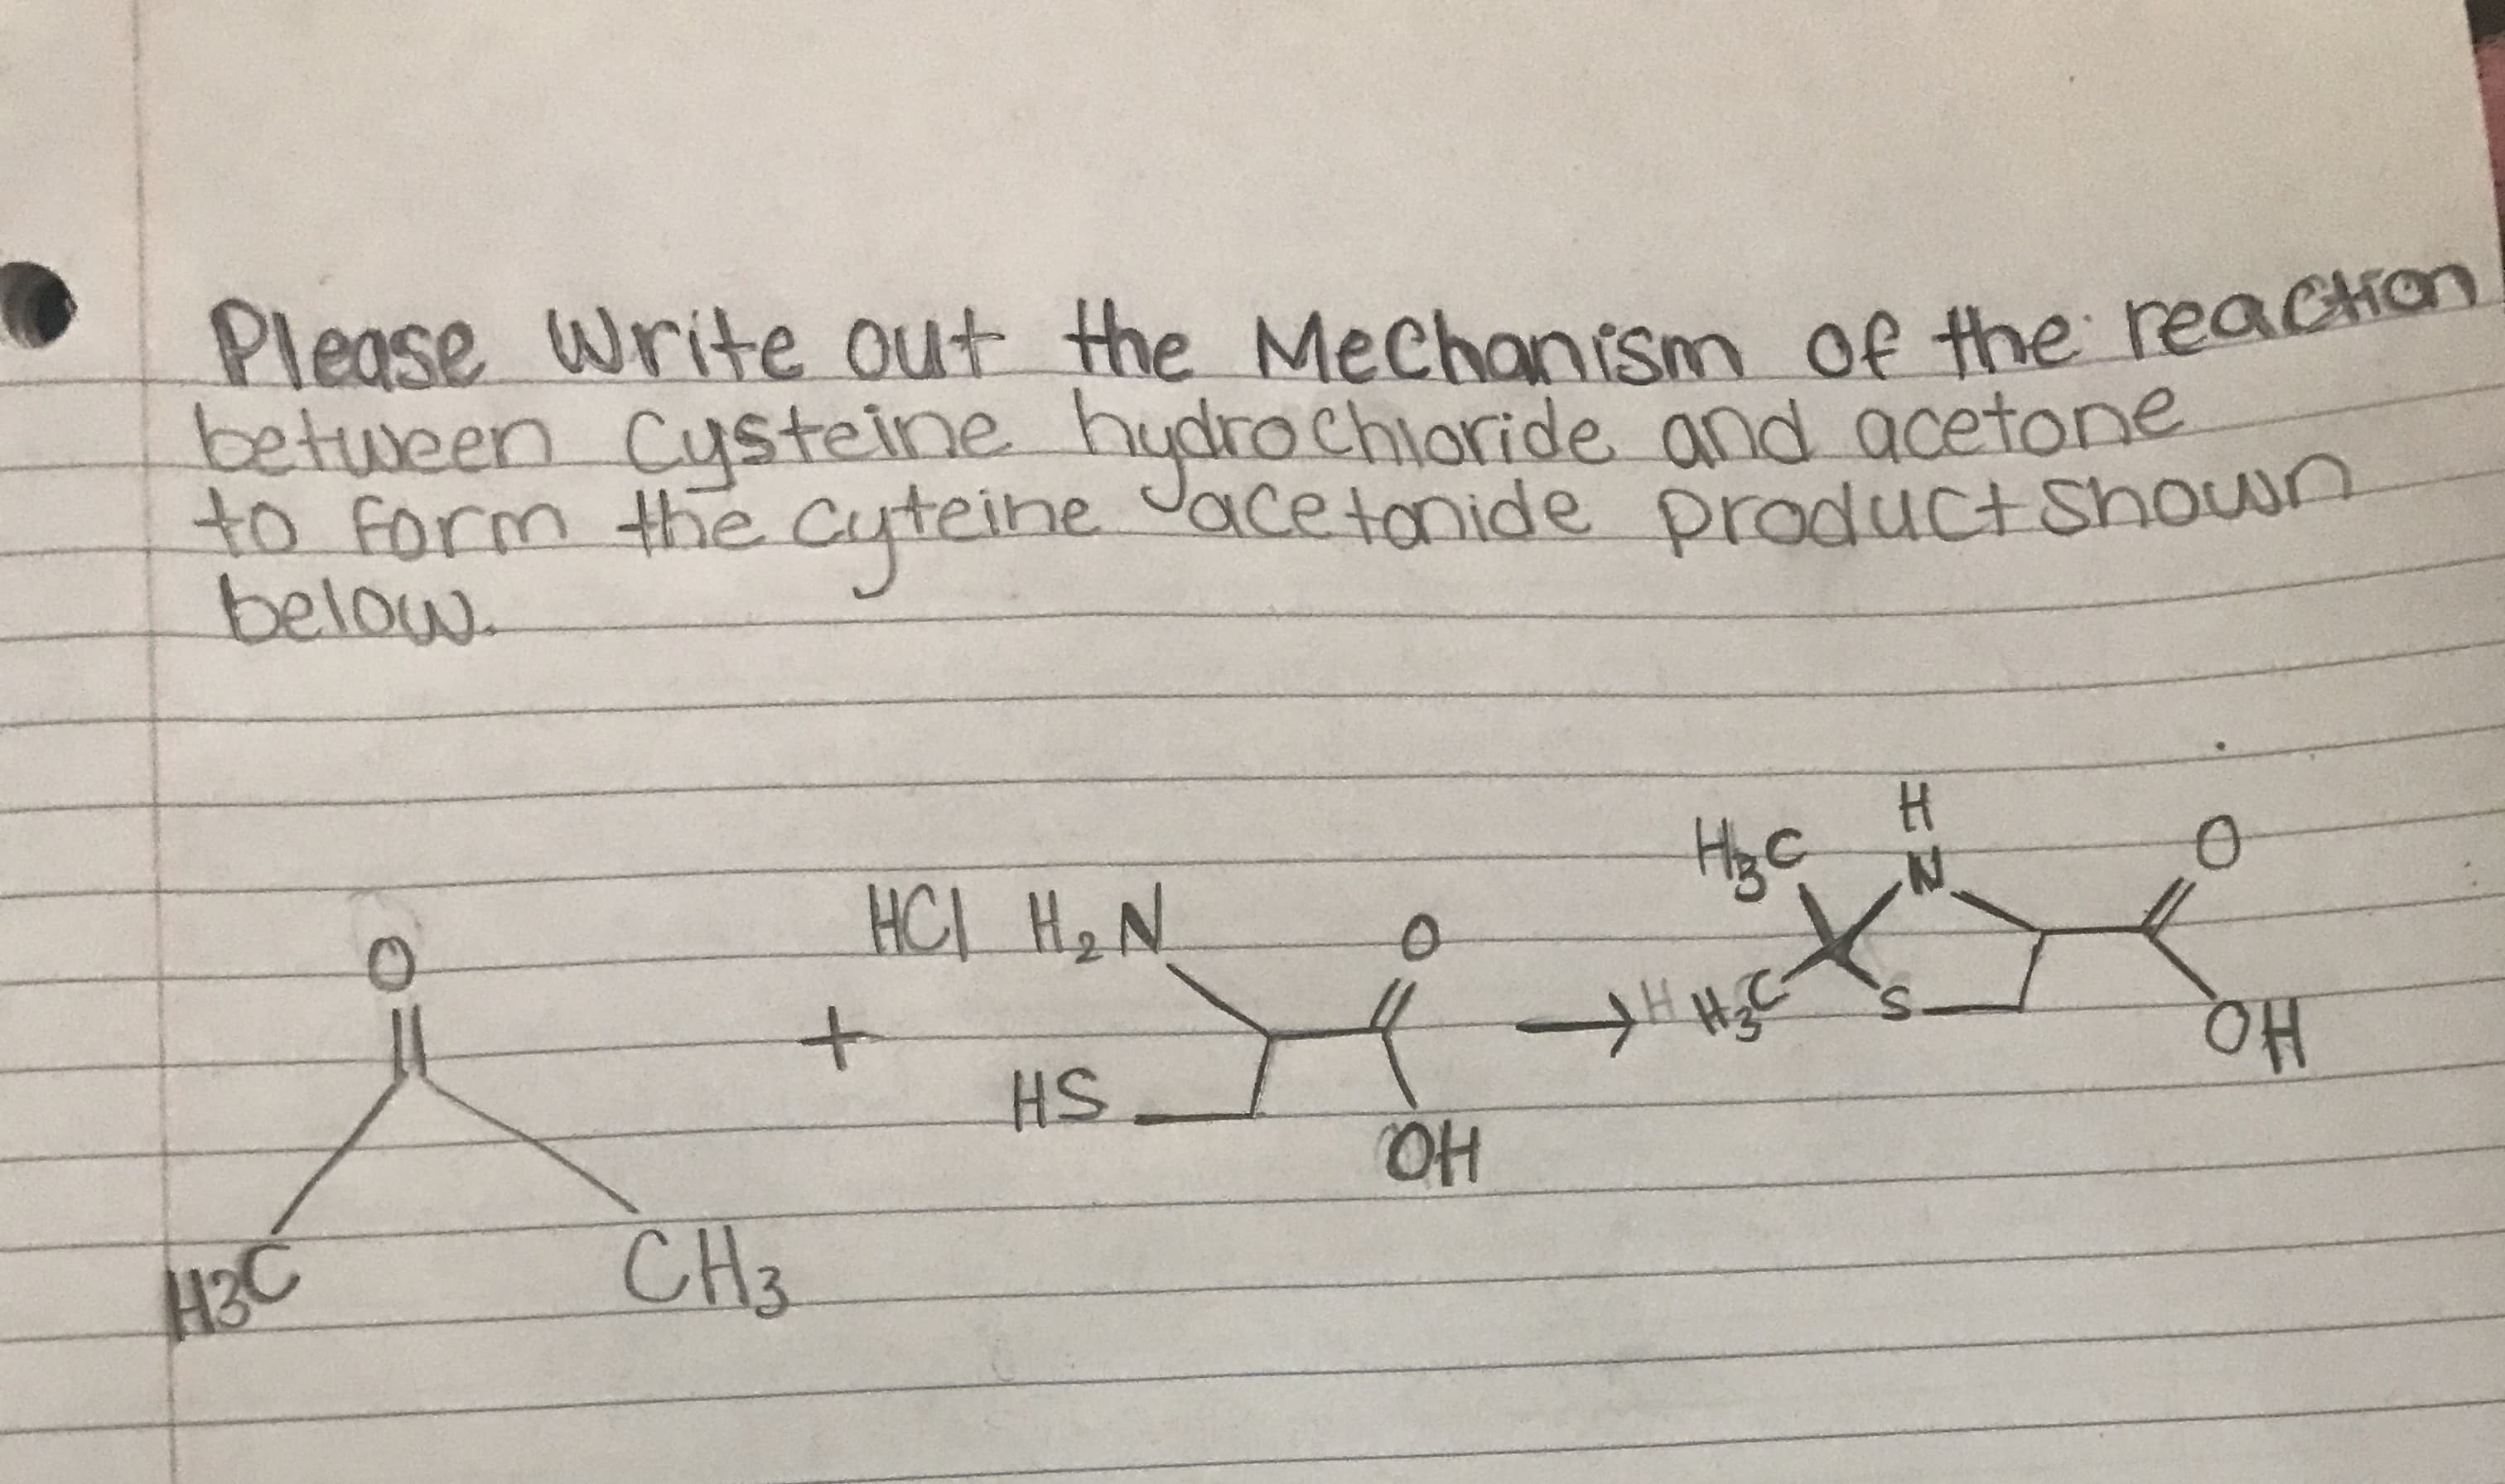 Please Write out the Mechanism of the reachon
betuween Custeine hudrochloride and acetone
to form the Cuteine Jacetonide product Shoun
below
H
HCL H2N
++
HS
CH3
H2C
ON
